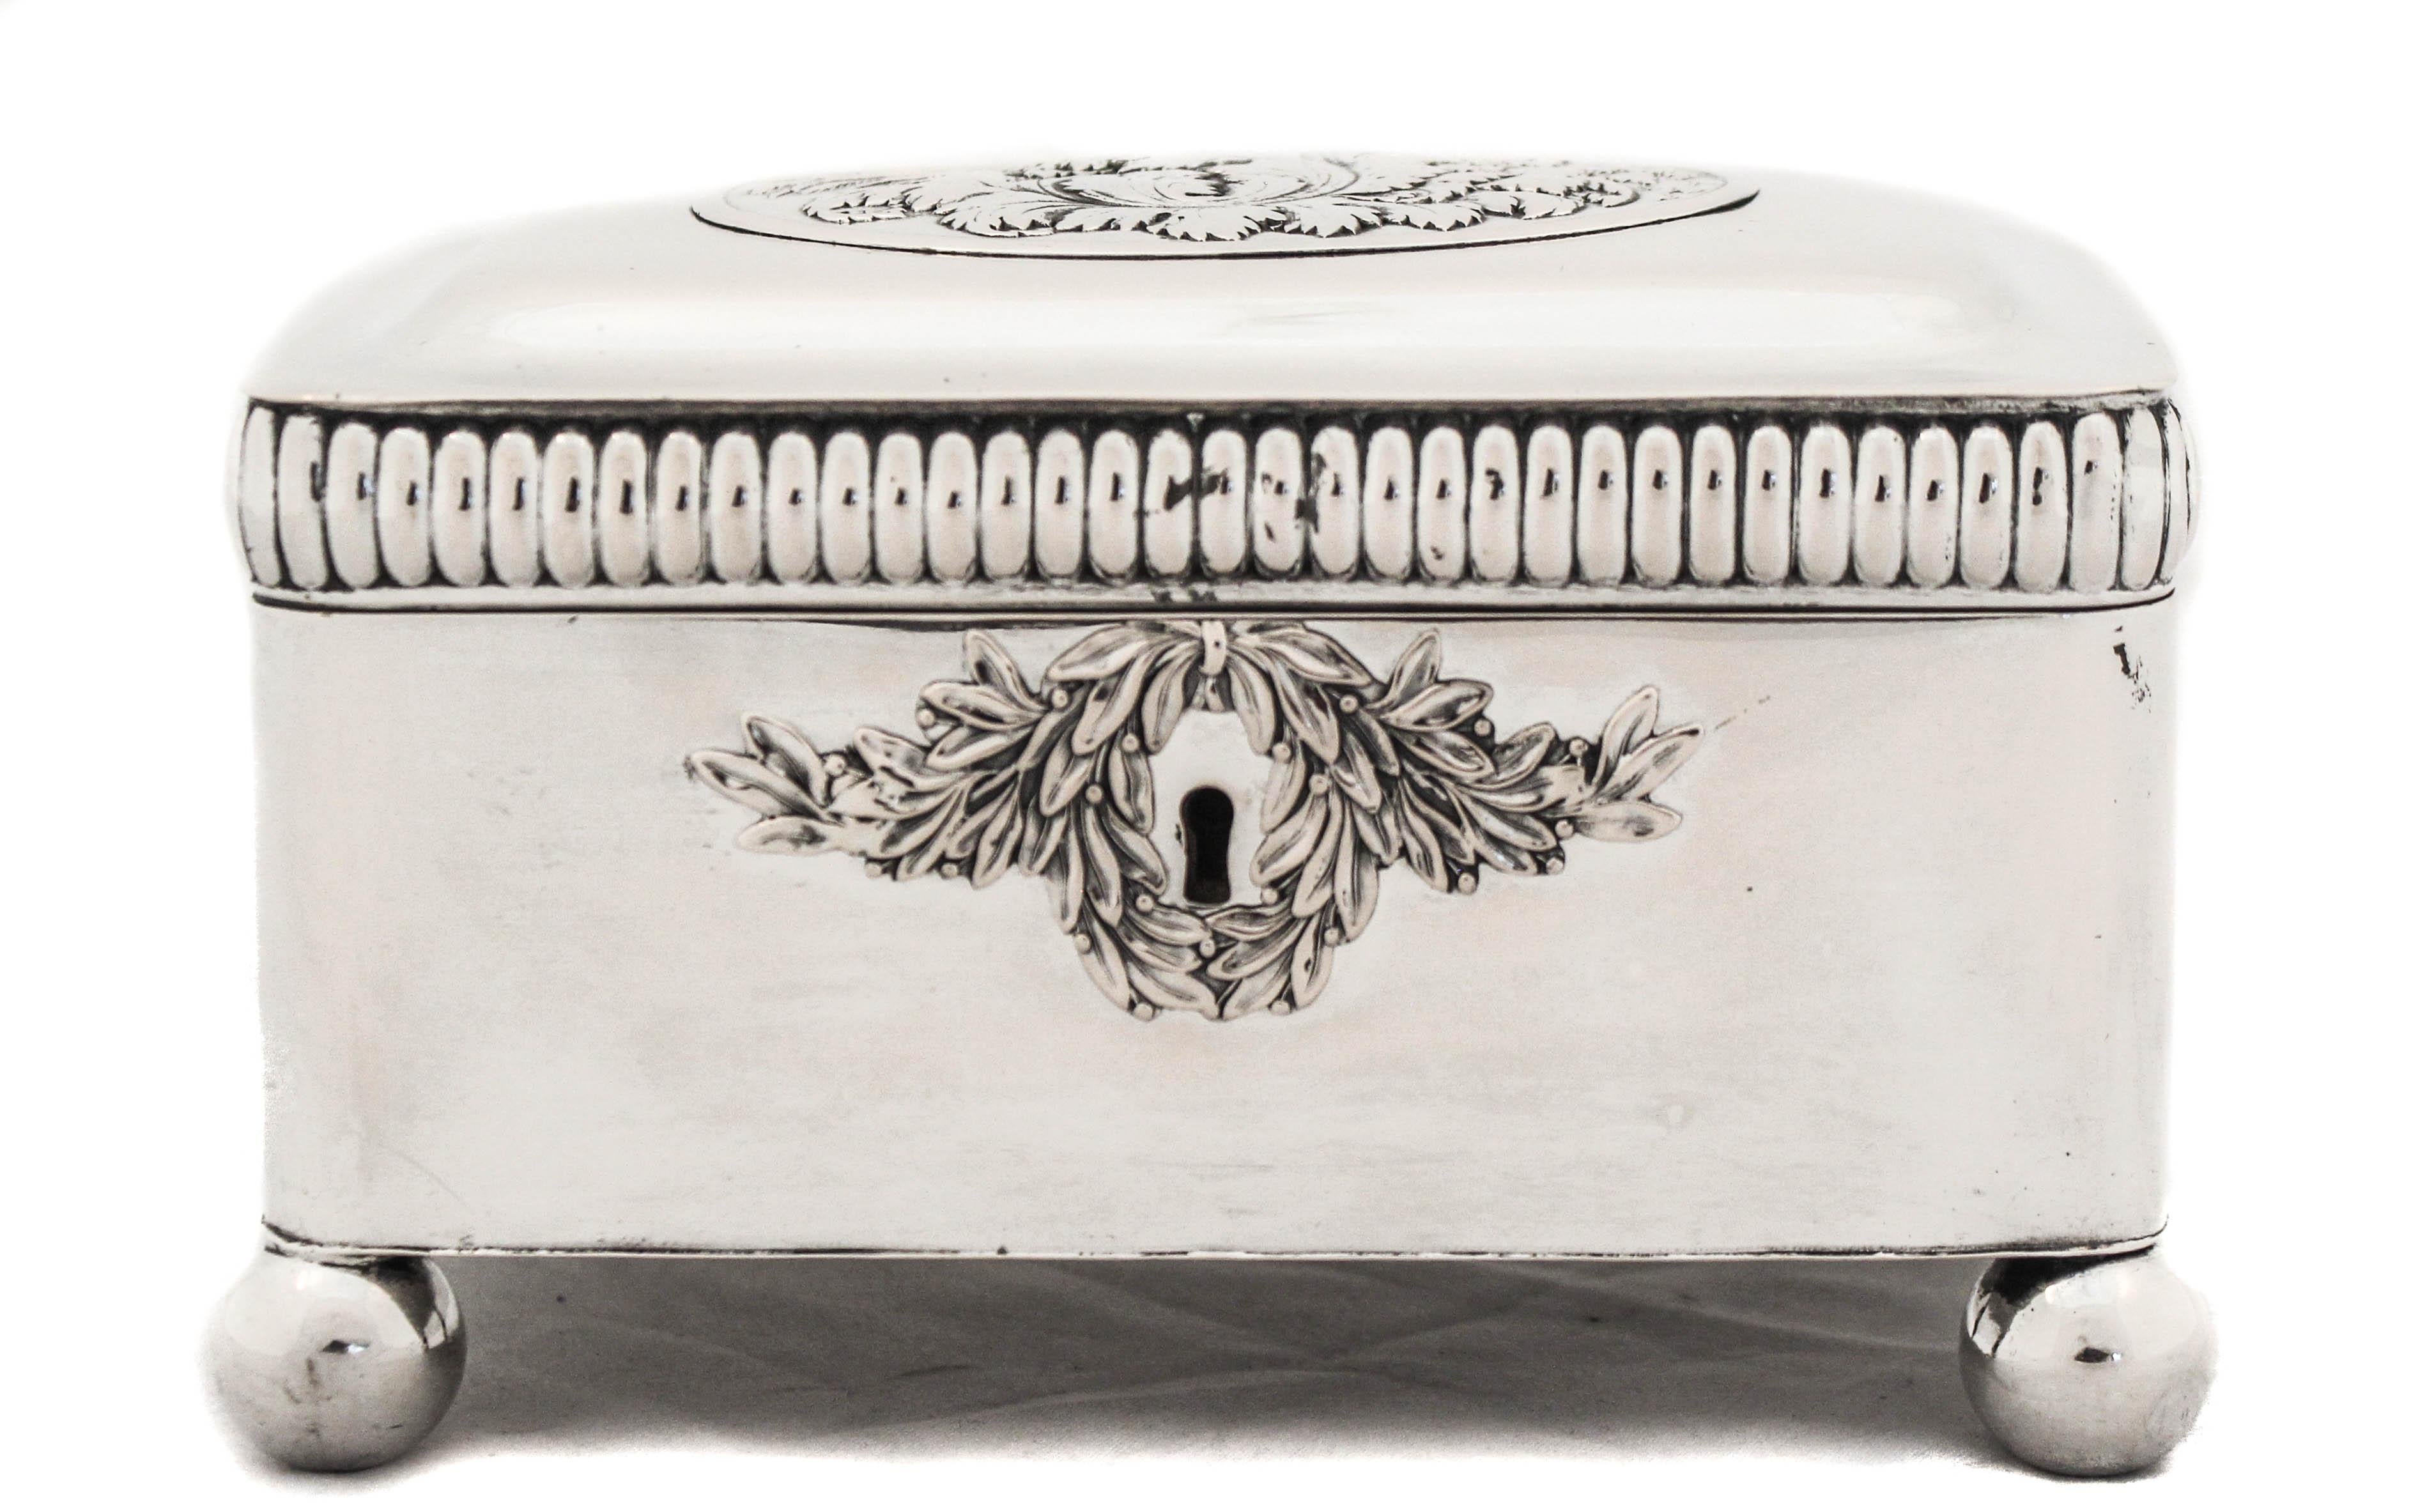 We are delighted to offer you this sterling silver box made in the early 20th century in Austria.  It has four balls/feet, one on each corner and is lifted off the surface.  It has a raised wreath around the keyhole and on the lid a lovely floral